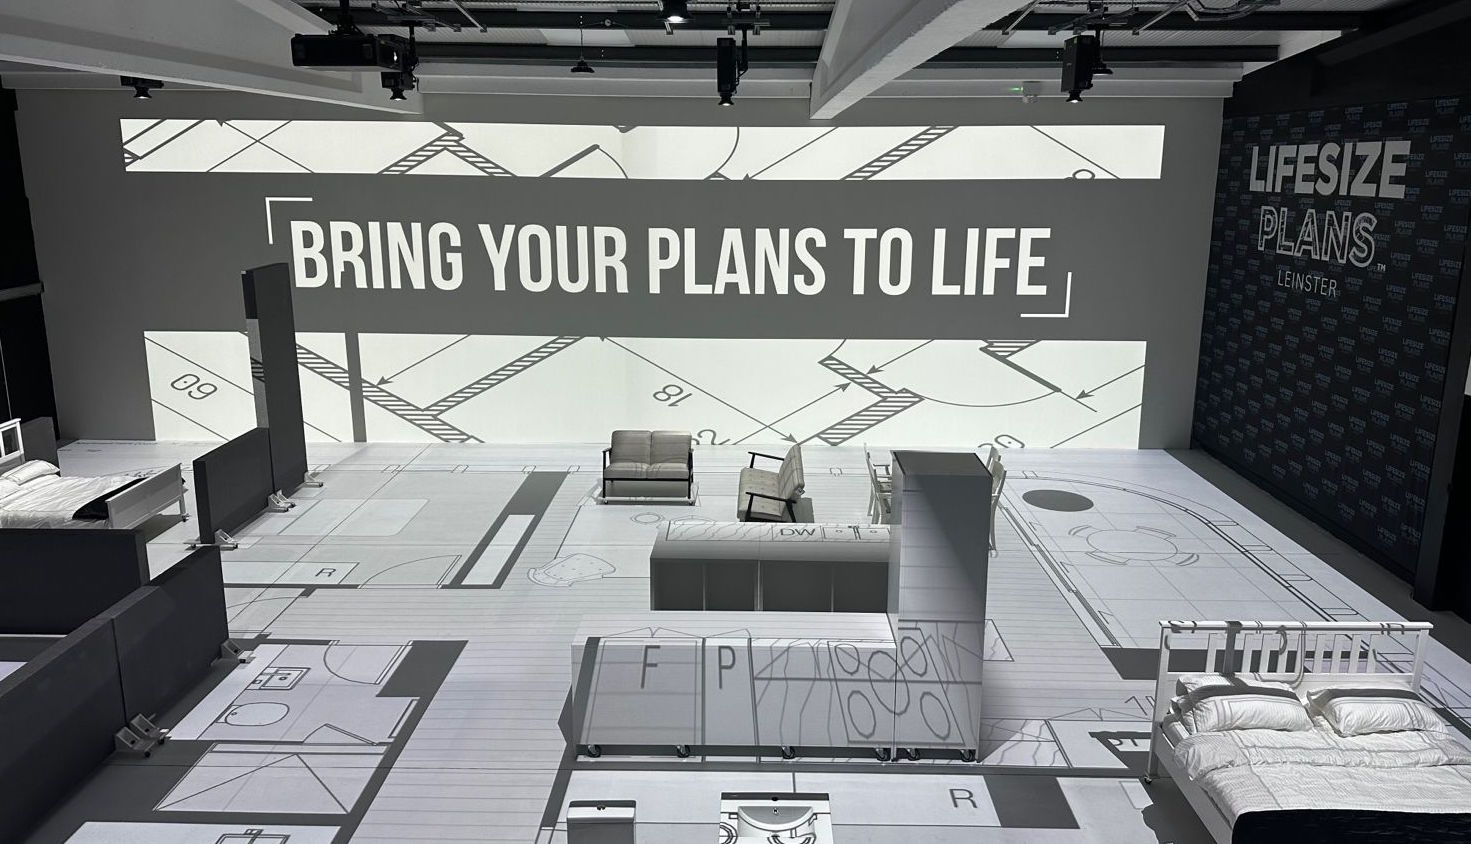 life-size walk through - an image of the Lifesize Plans Leinster showroom 